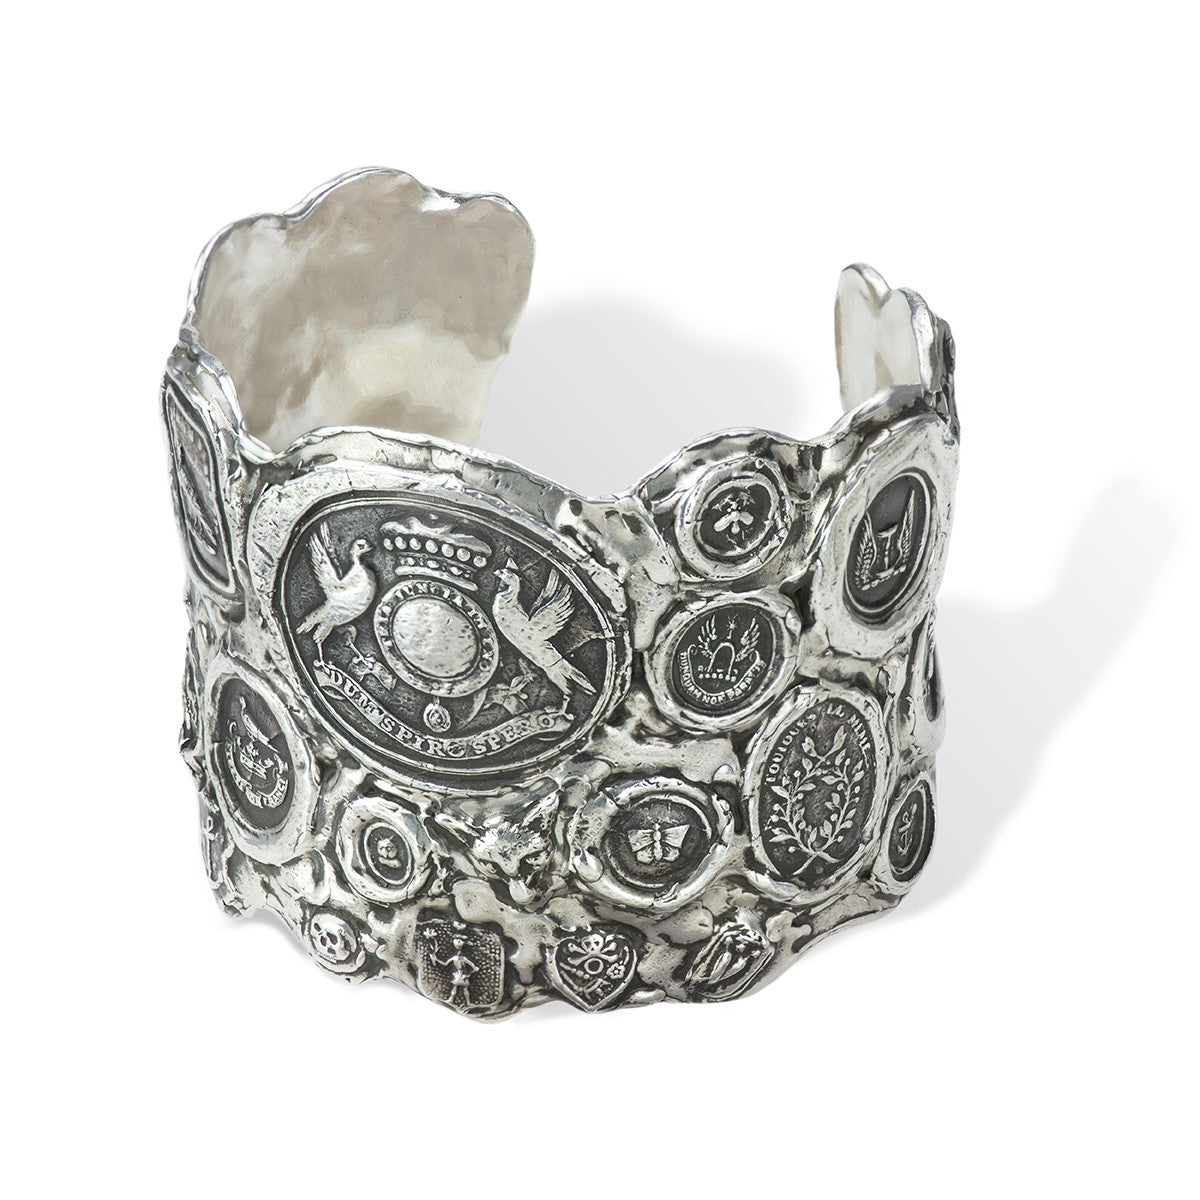 A close up of our Wide Multi Talisman Cuff, a selection of talismans fused together to create a meaningful cuff.